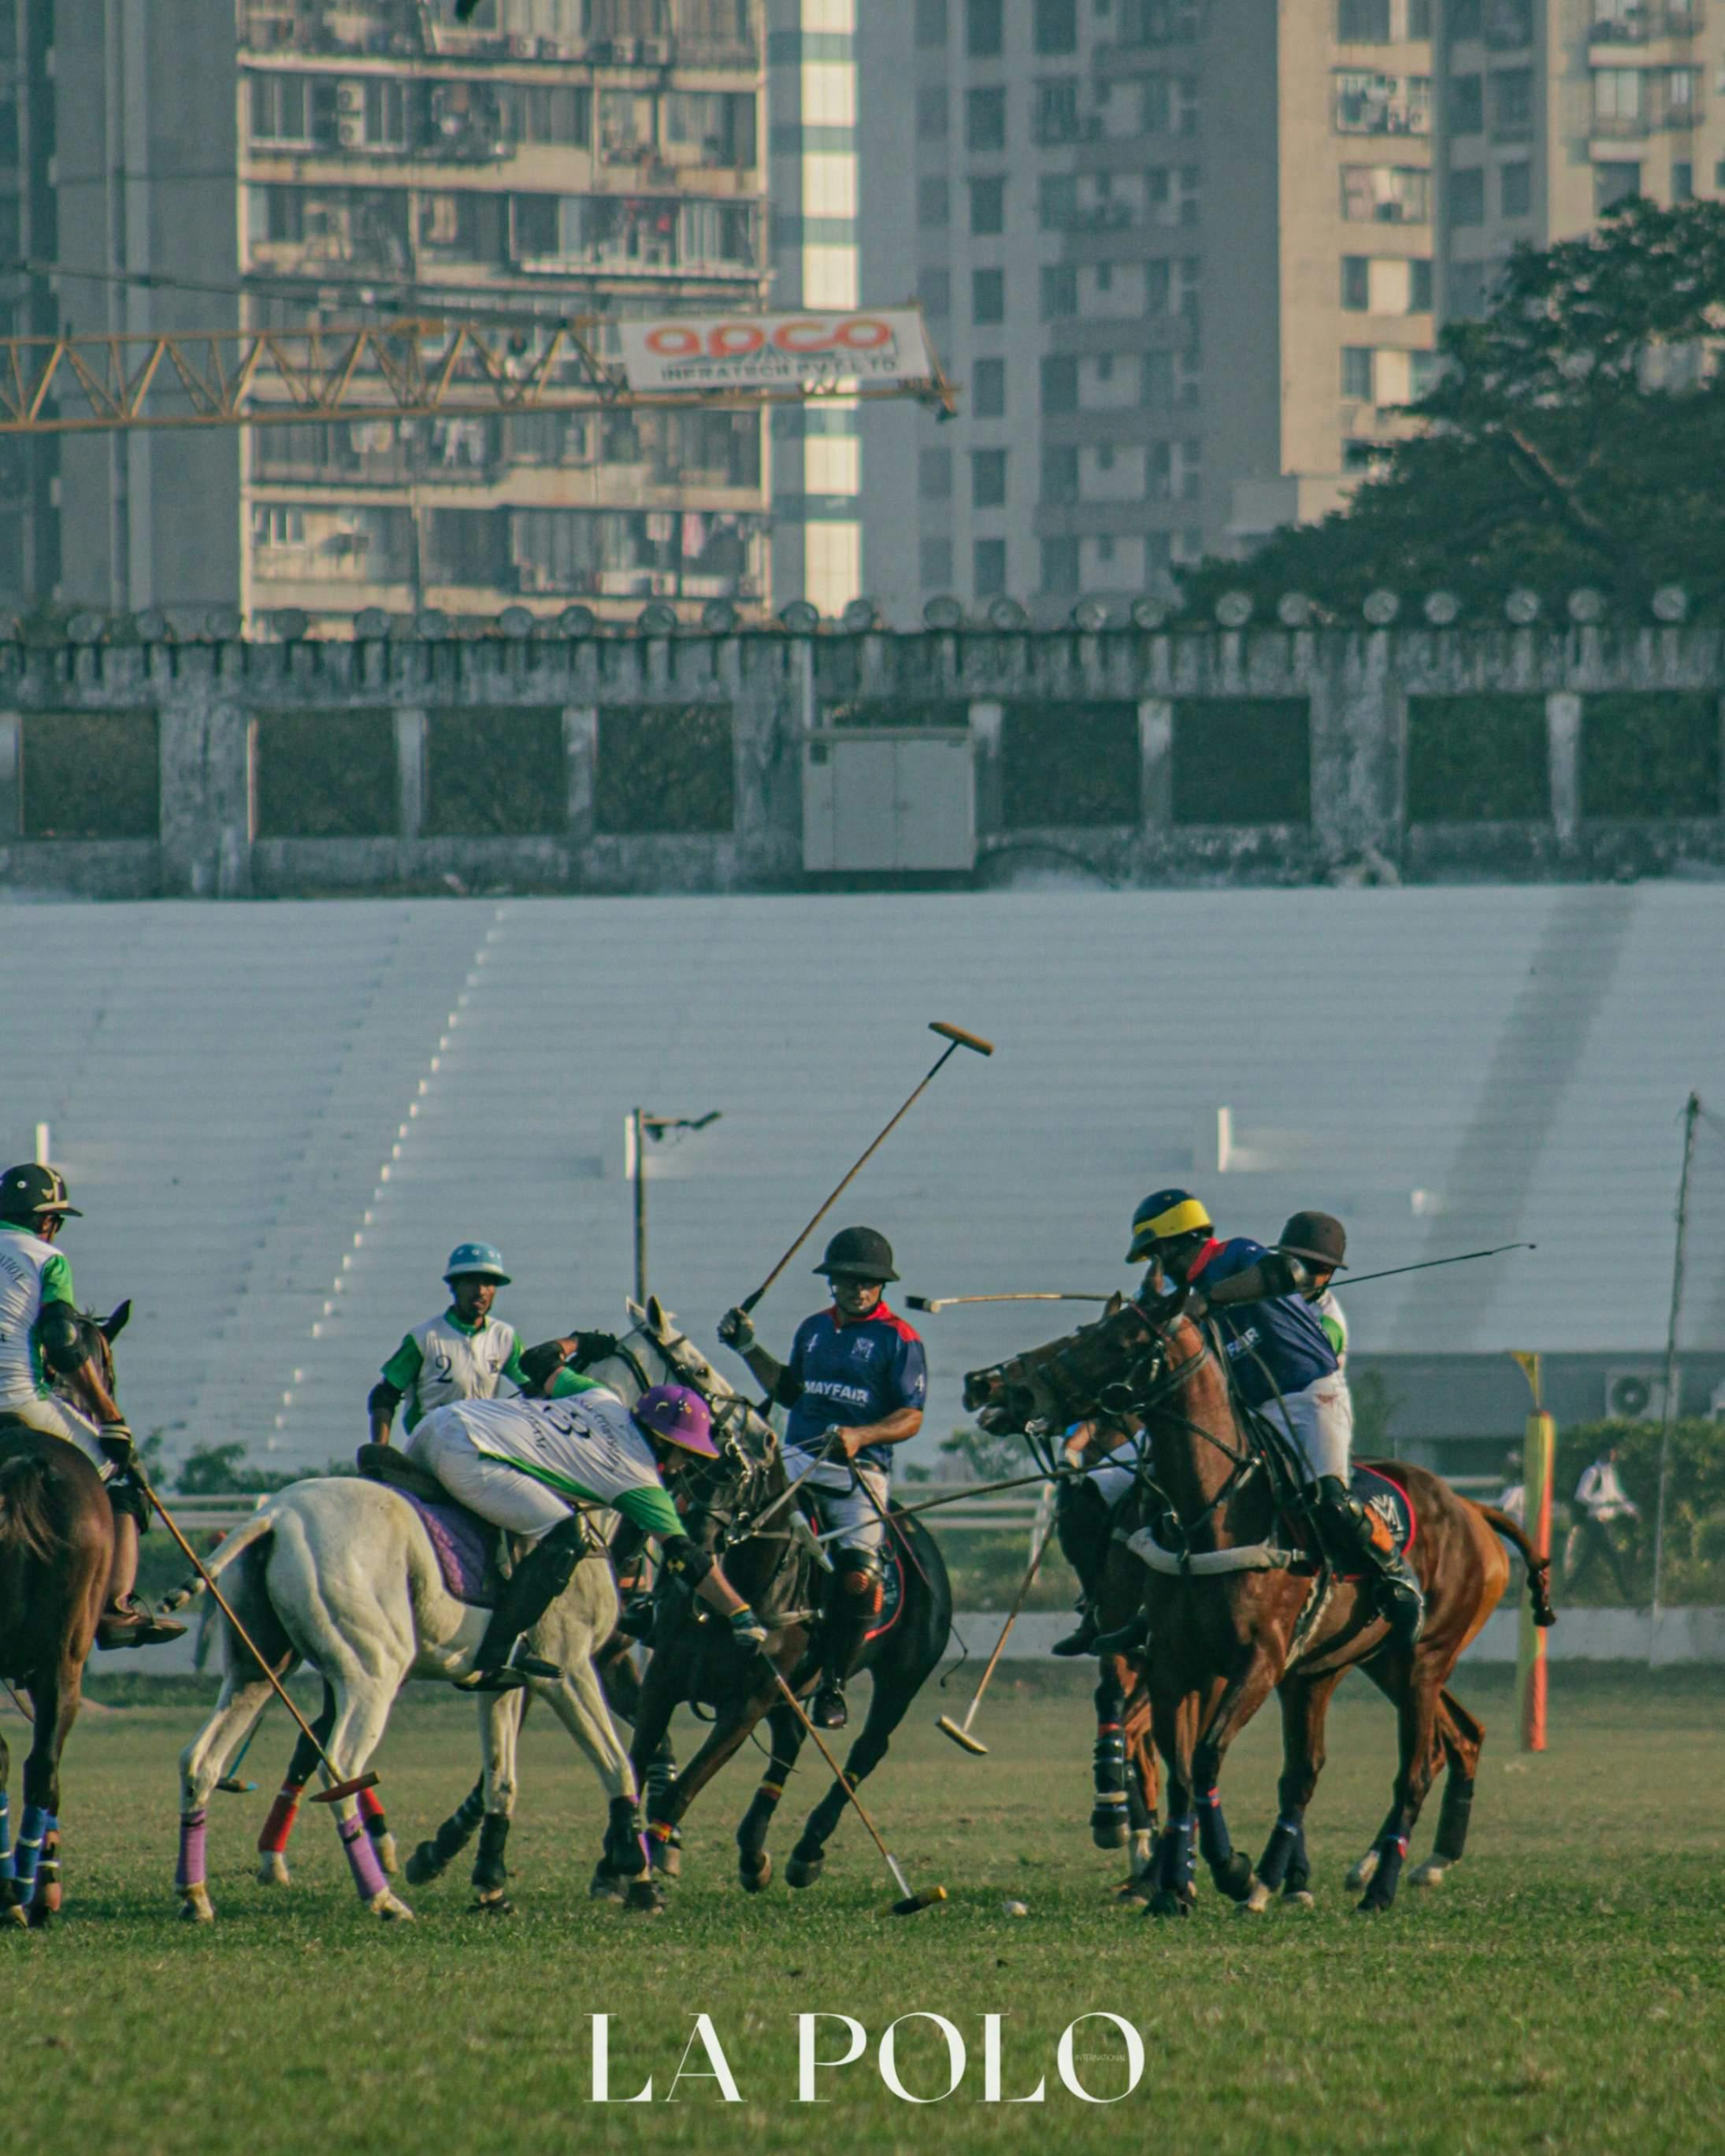 The teamwork required to play polo at this level is inspiring.